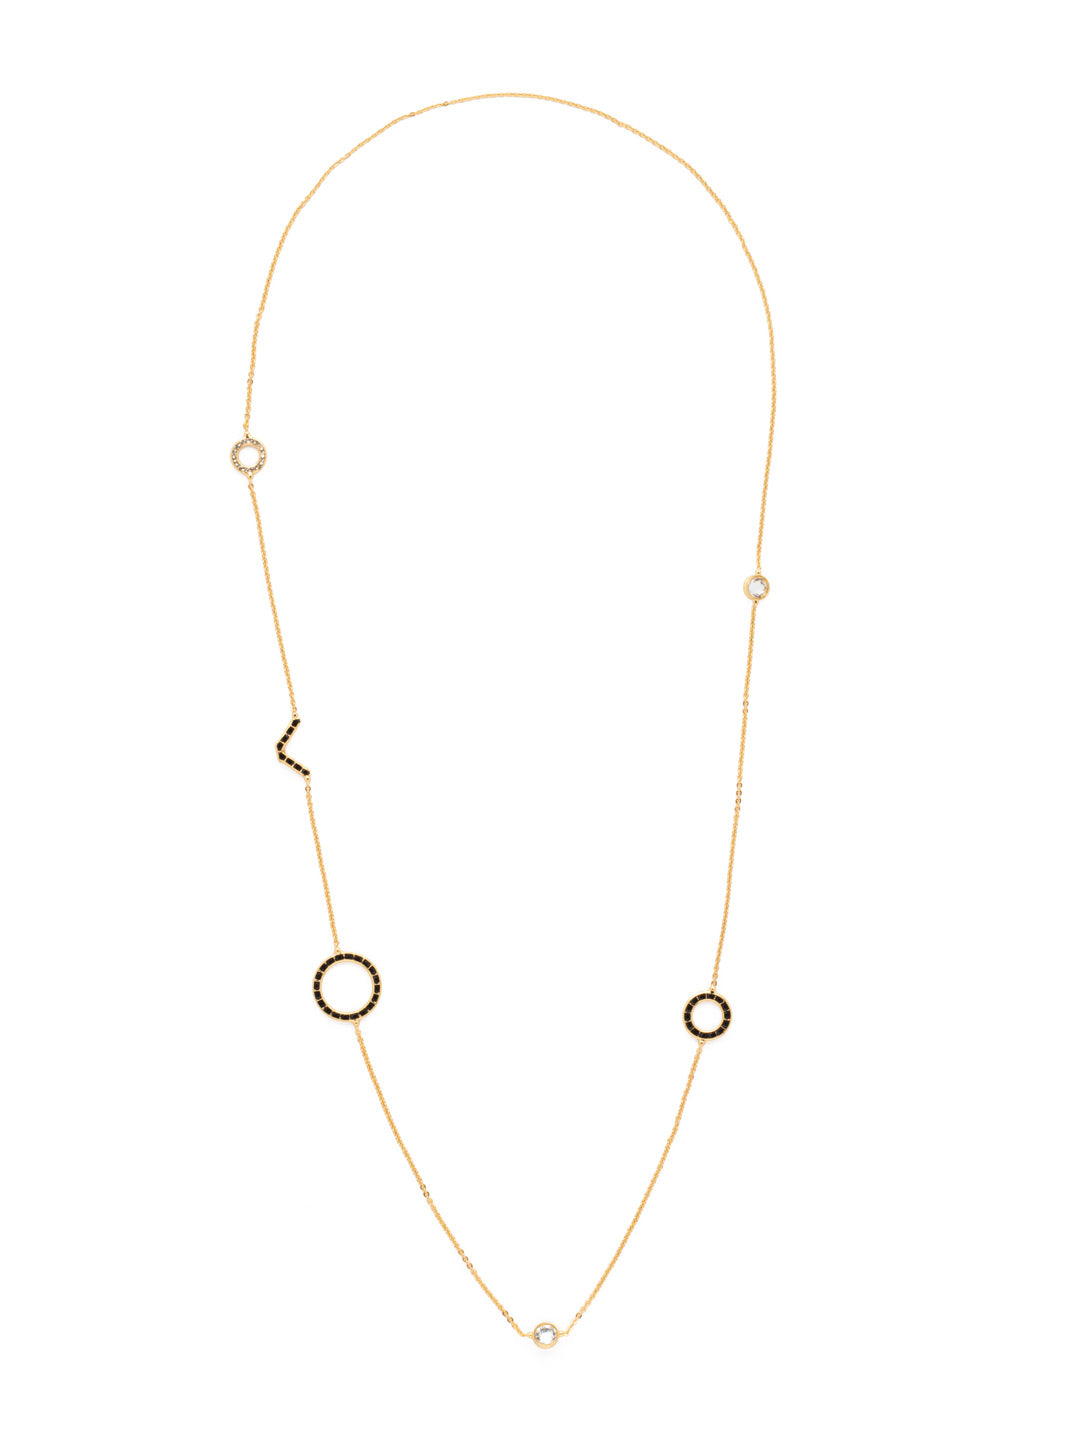 Layla Long Necklace - 4NEV70BGMMO - <p>The Layla Long Necklace combines different crystals and shapes on a long single chain. From Sorrelli's Midnight Moon collection in our Bright Gold-tone finish.</p>